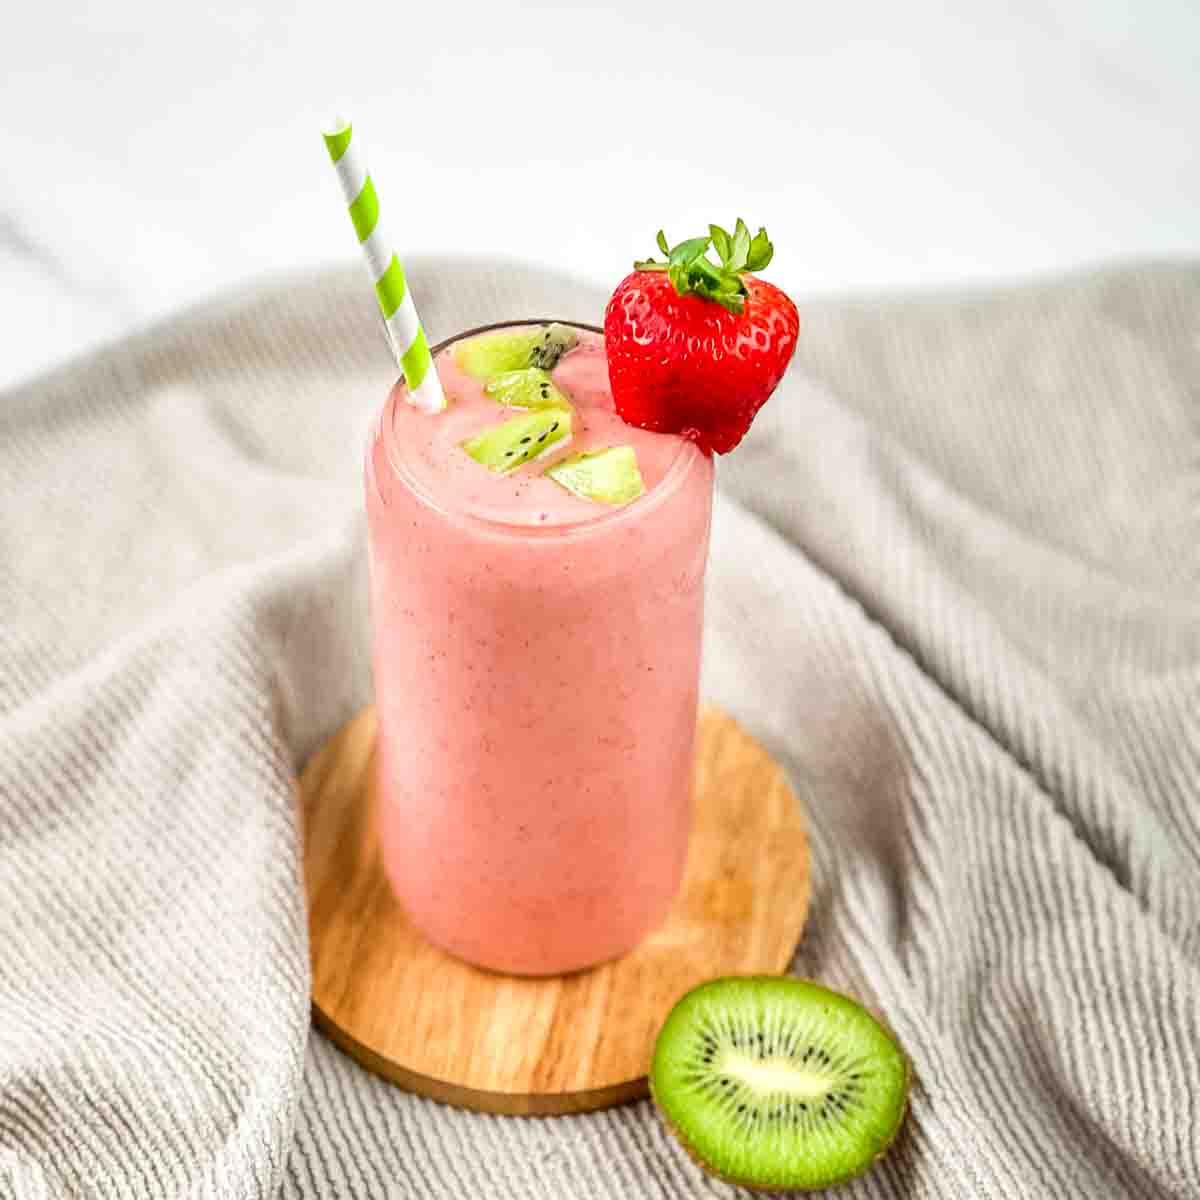 A tall glass filled with copycat tropical smoothie cafe kiwi quencher, garnished with fresh kiwi and strawberry, with a green and white striped straw.